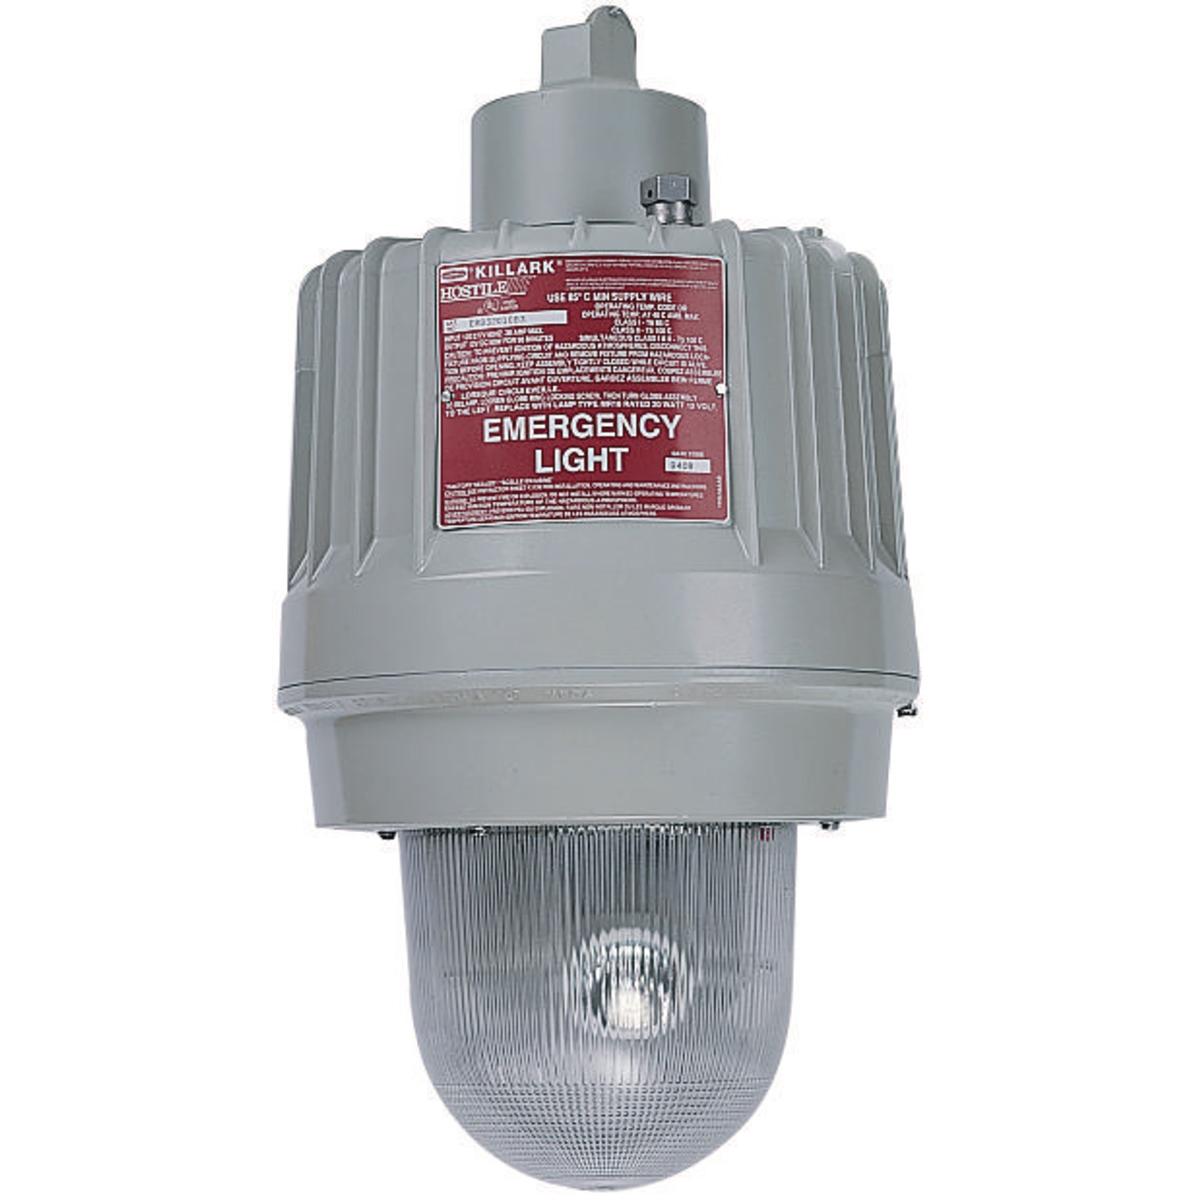 Hubbell EBB32010A2 Emergency Hazardous Location Three Lamp 3/4" Pendant  ; Patented design three high intensity lamps can be independently adjusted to provide custom emergency lighting to a specific area ; Three 20 watt MR16 lamps included ; Pendant, bracket and ceiling mou